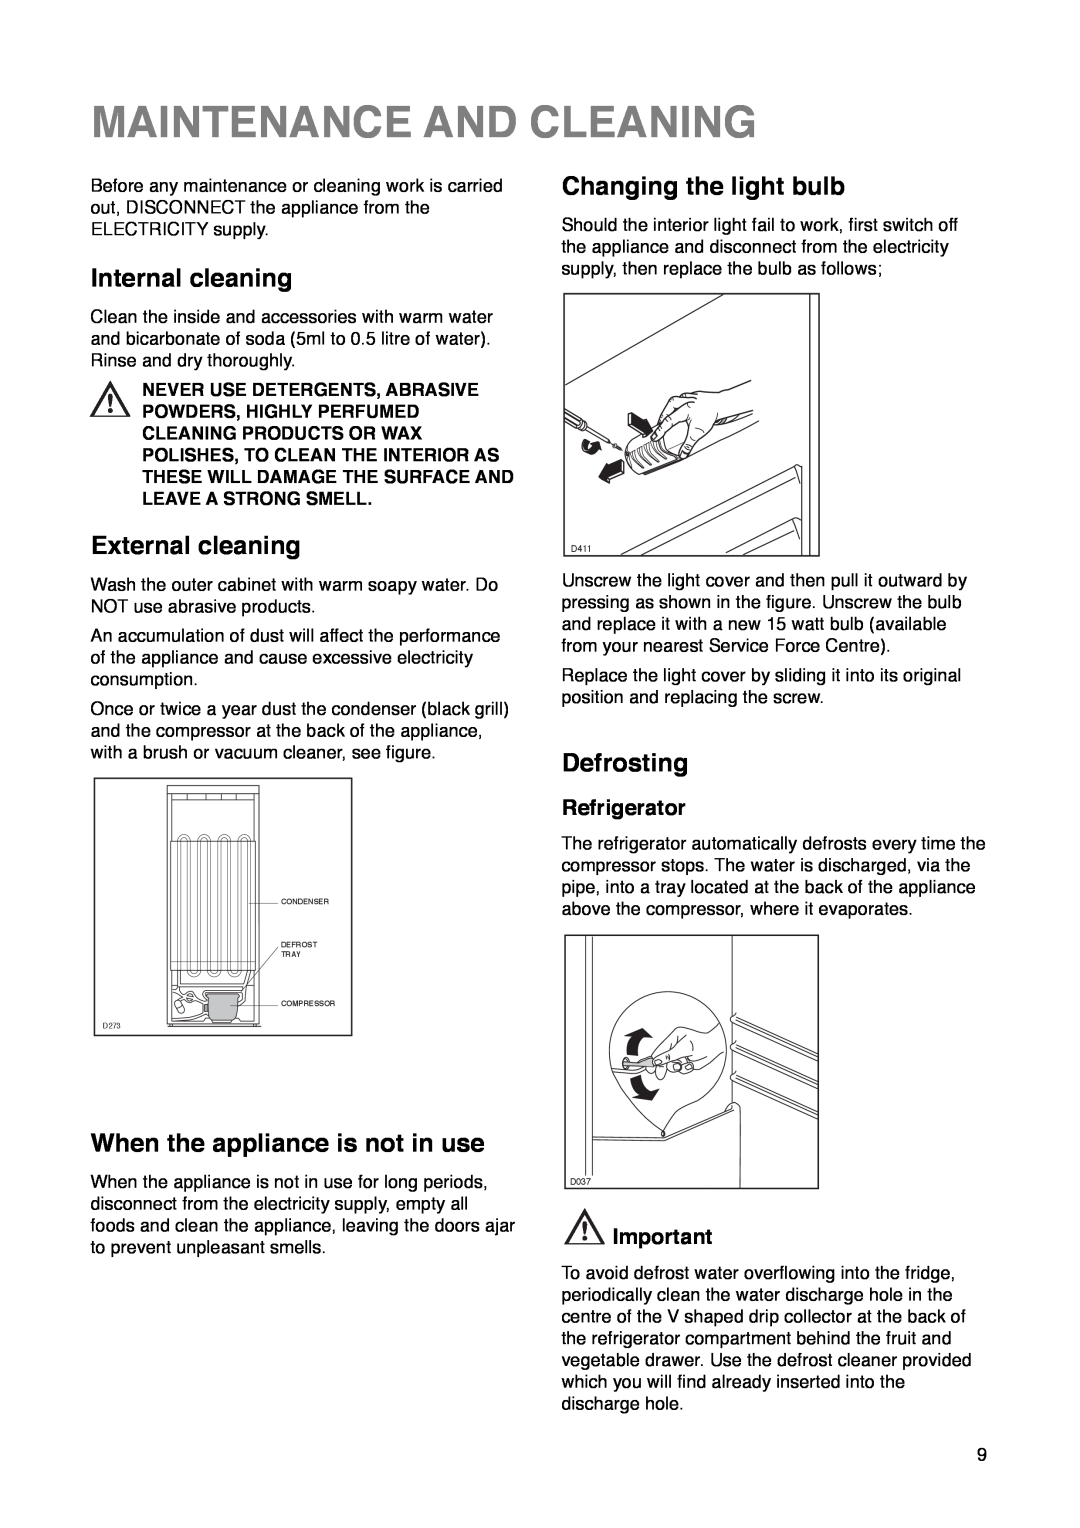 Zanussi ZD 50/33 R manual Maintenance And Cleaning, Internal cleaning, External cleaning, When the appliance is not in use 